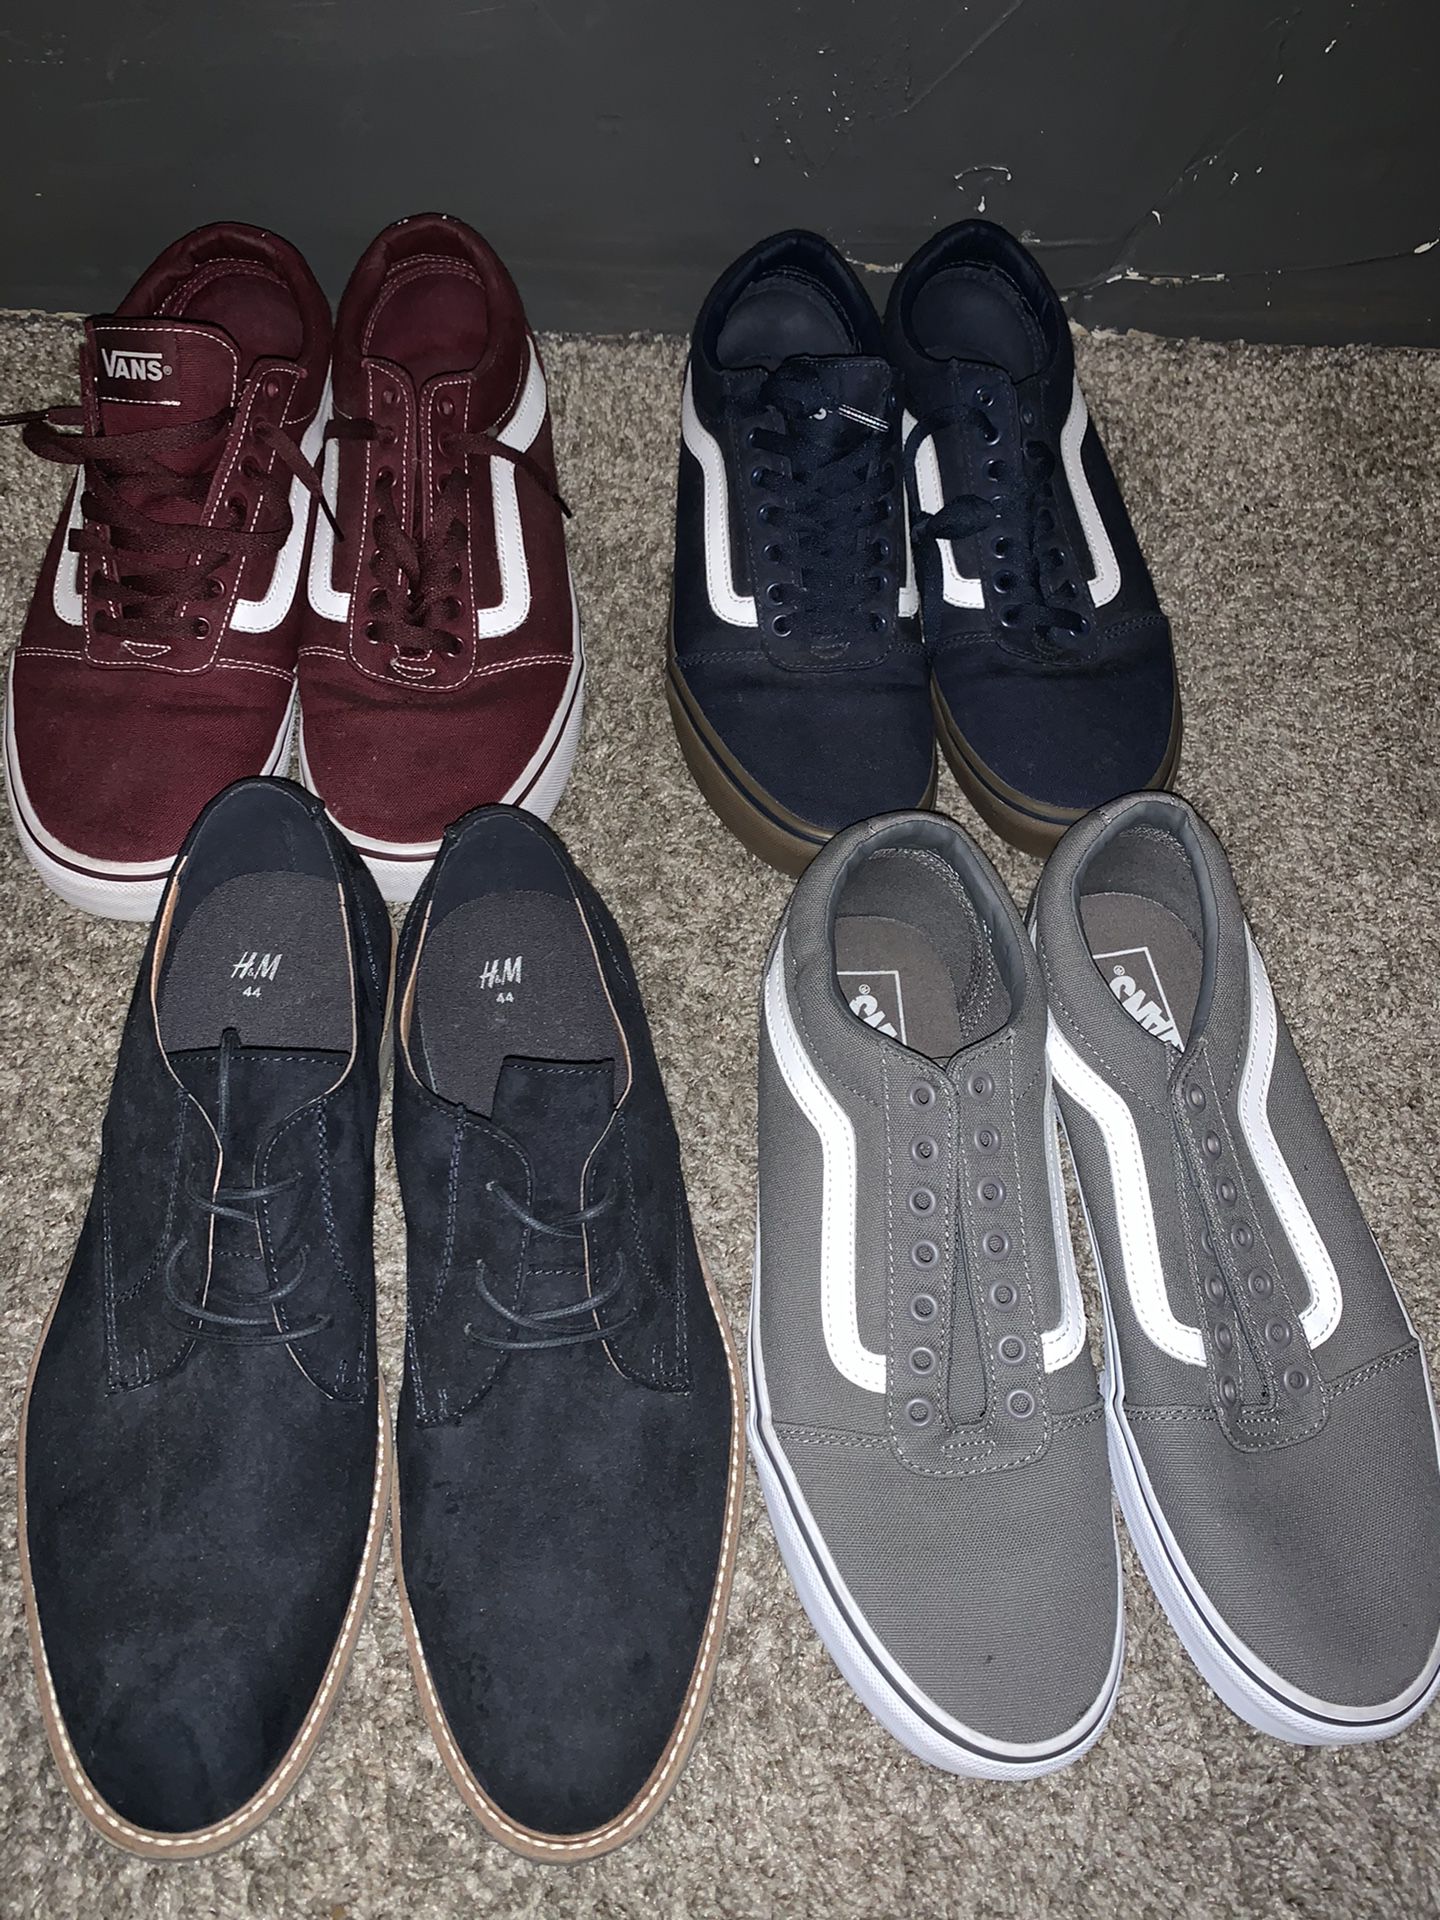 Vans brand new and pair of dress shoes